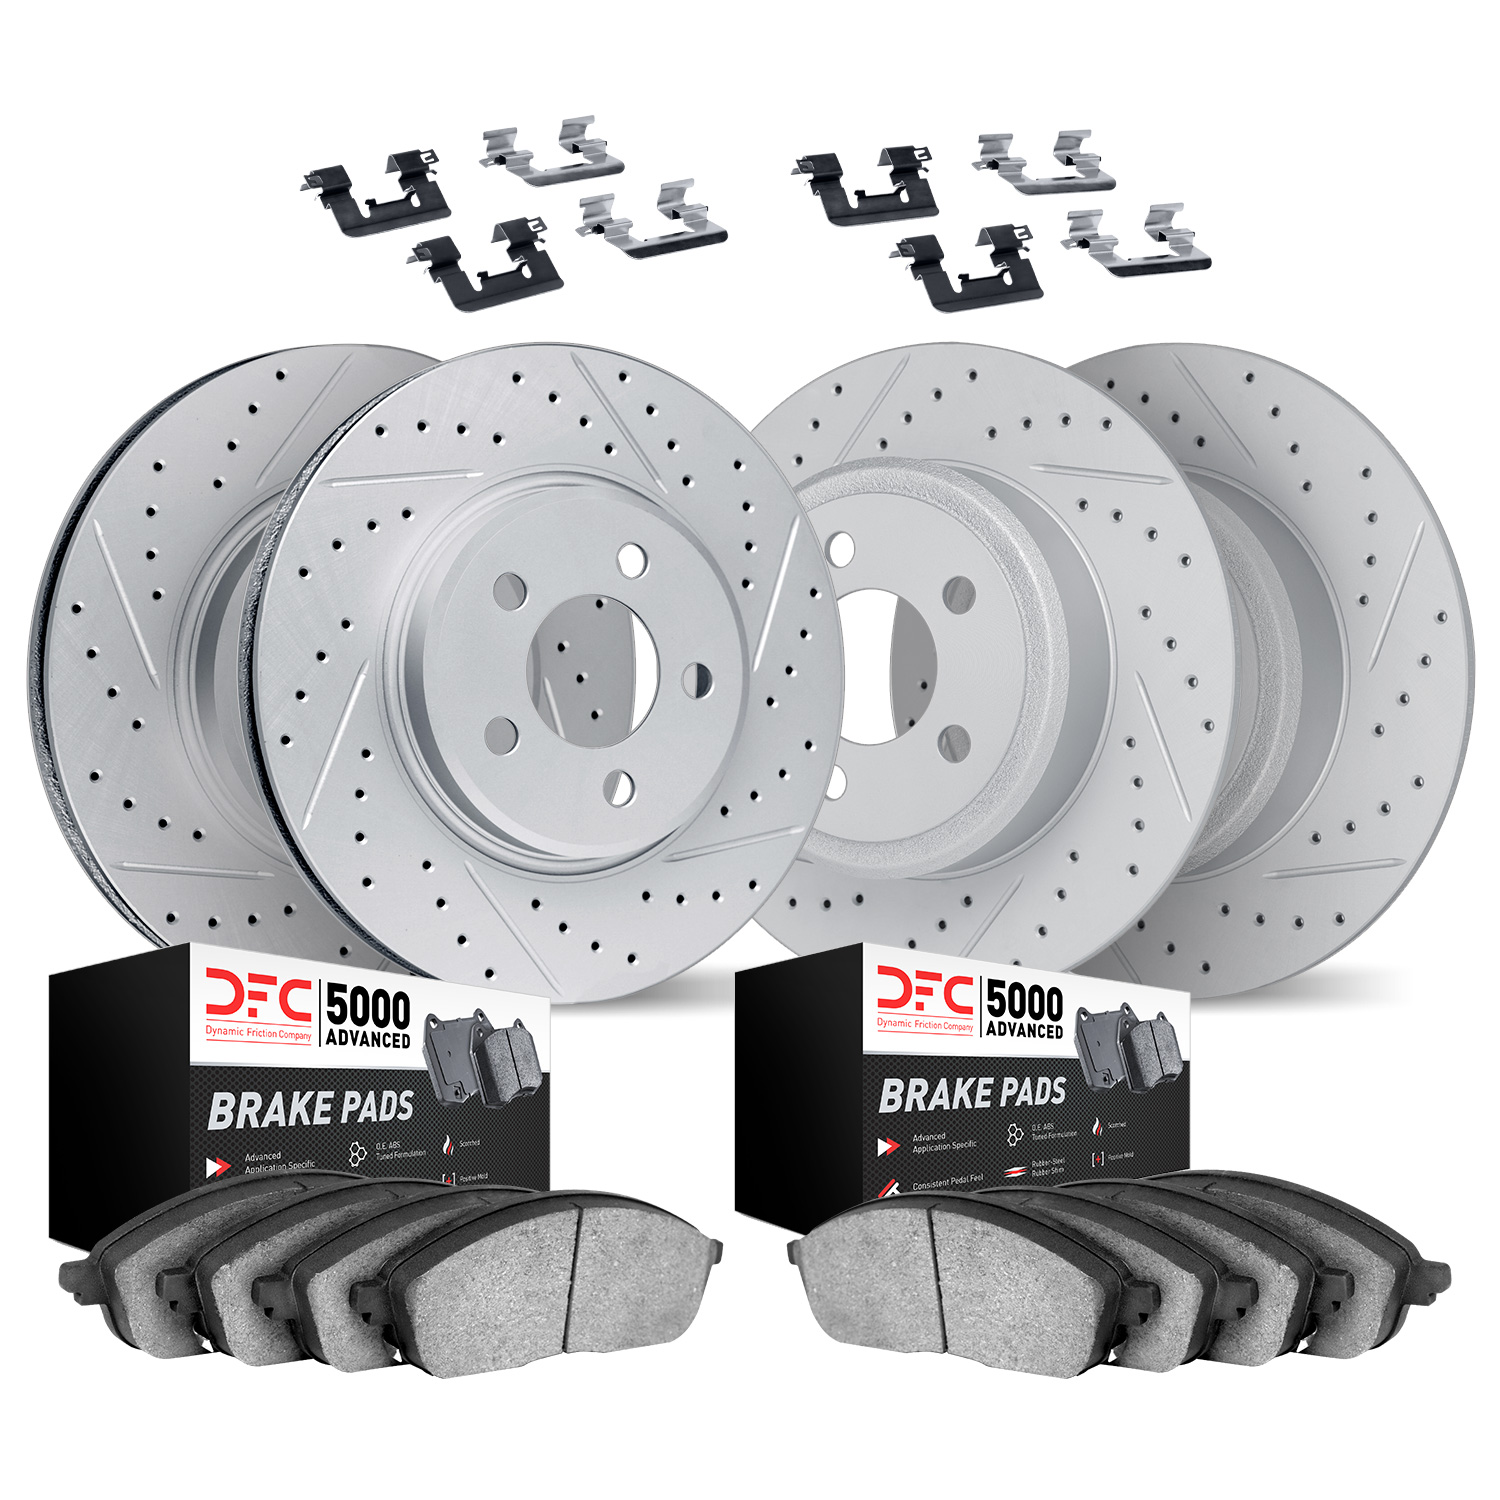 2514-45027 Geoperformance Drilled/Slotted Rotors w/5000 Advanced Brake Pads Kit & Hardware, 2016-2018 GM, Position: Front and Re